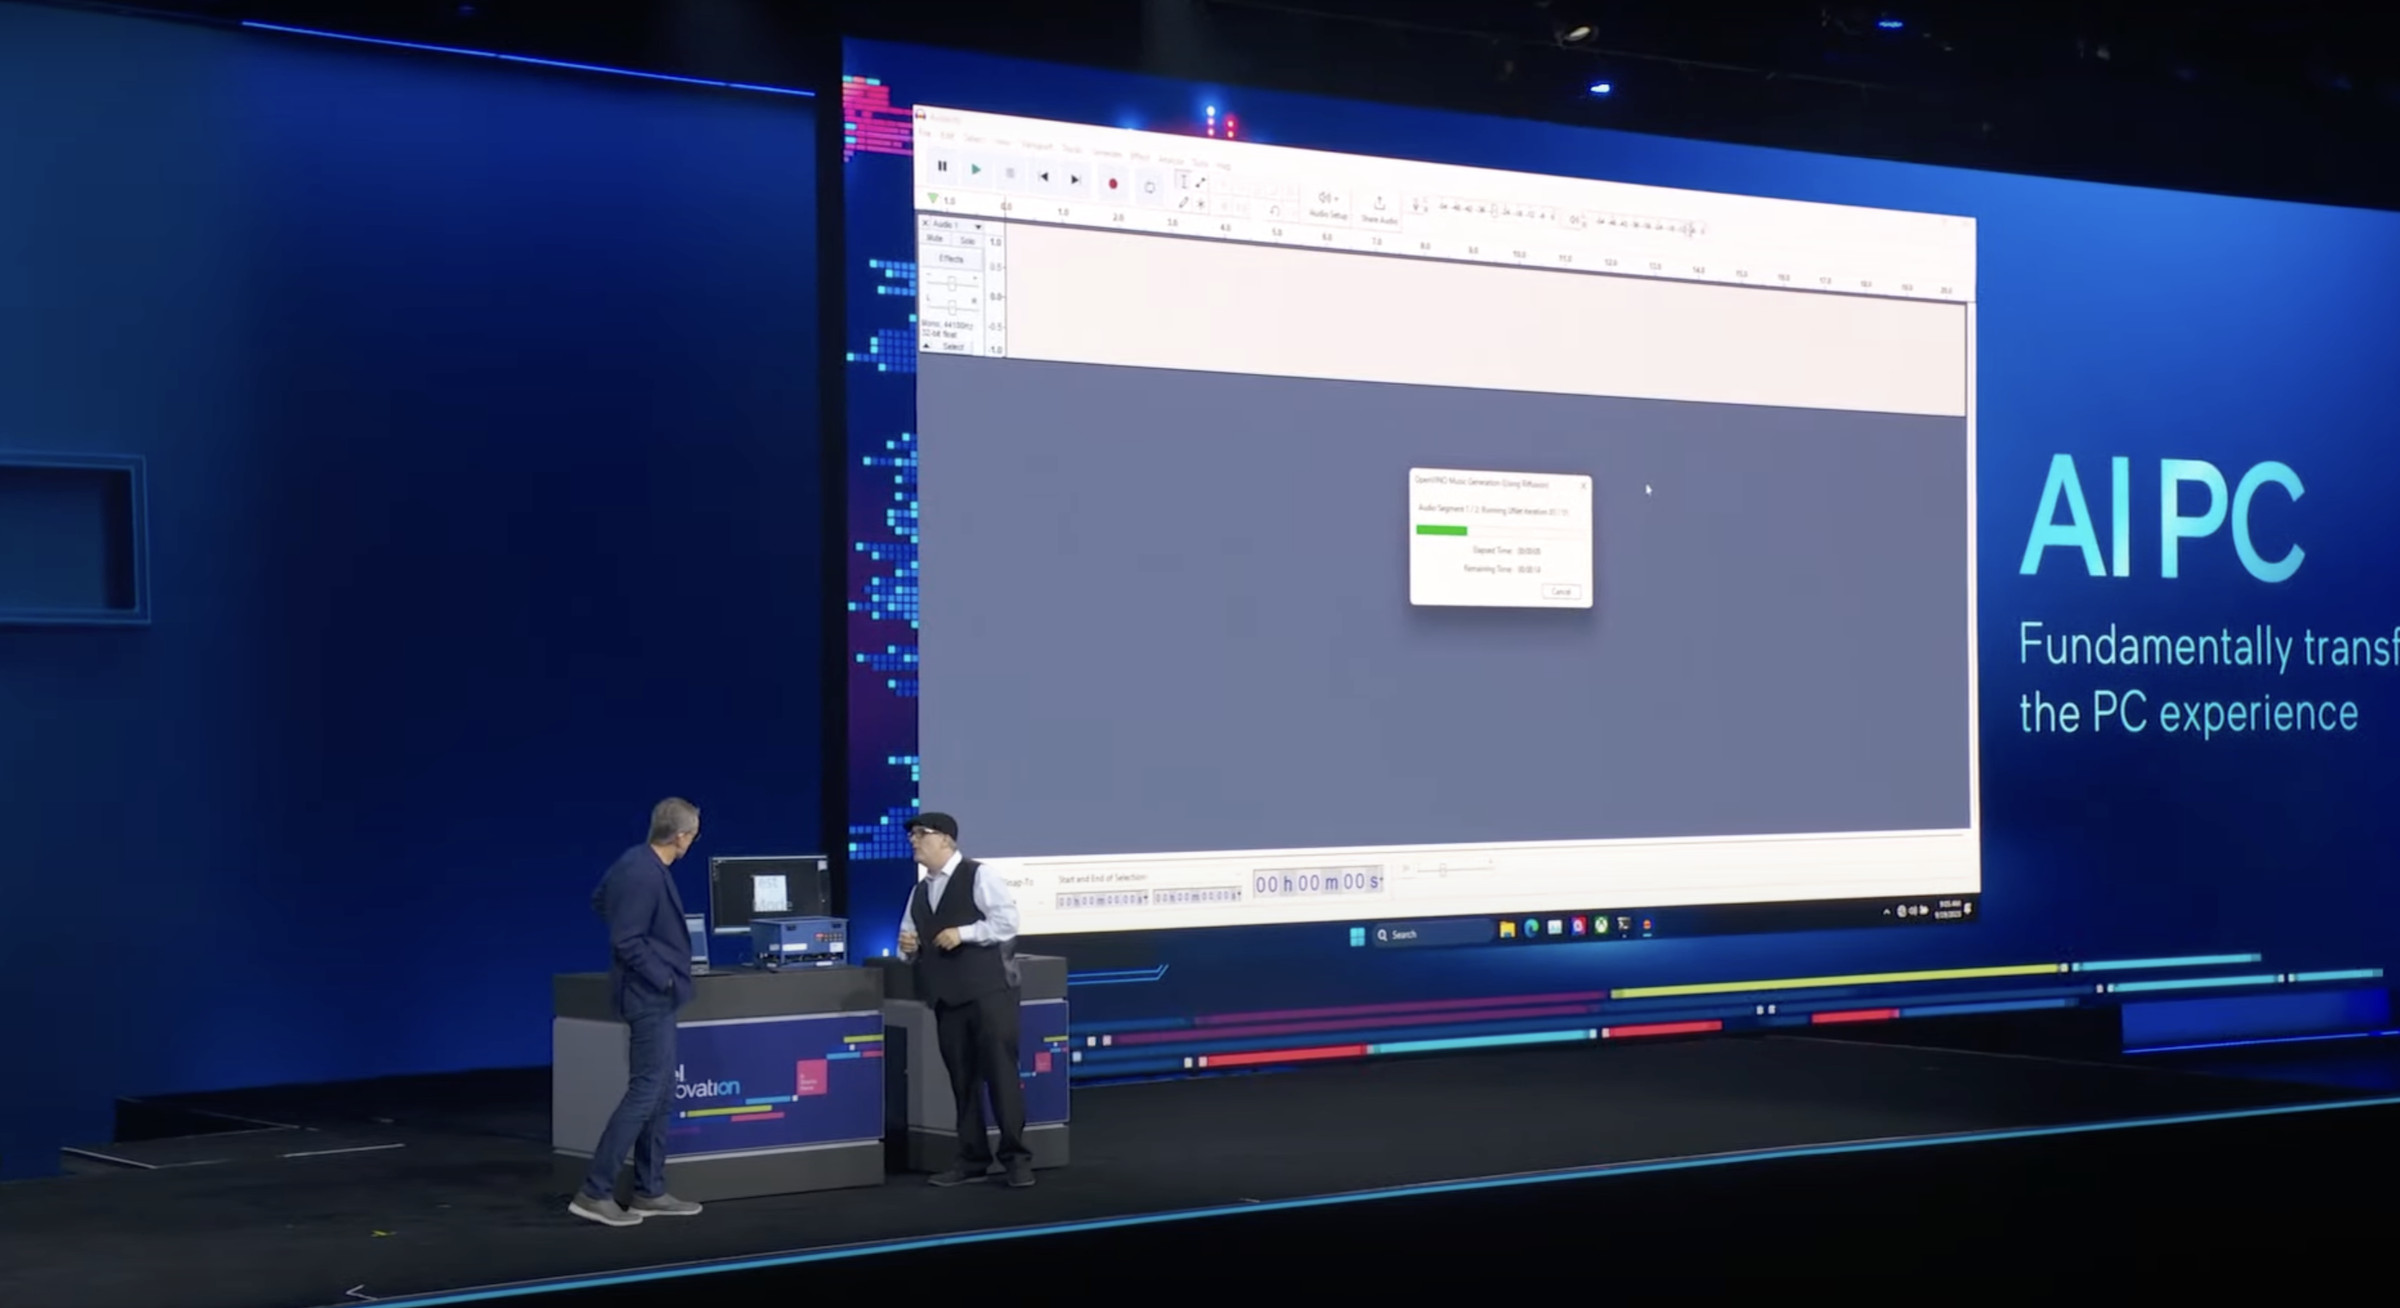 Pat Gelsinger and Craig stand in front of a slide that shows a Windows computer generating a file. Caption reads AI PC, fundamentally transform the PC experience.